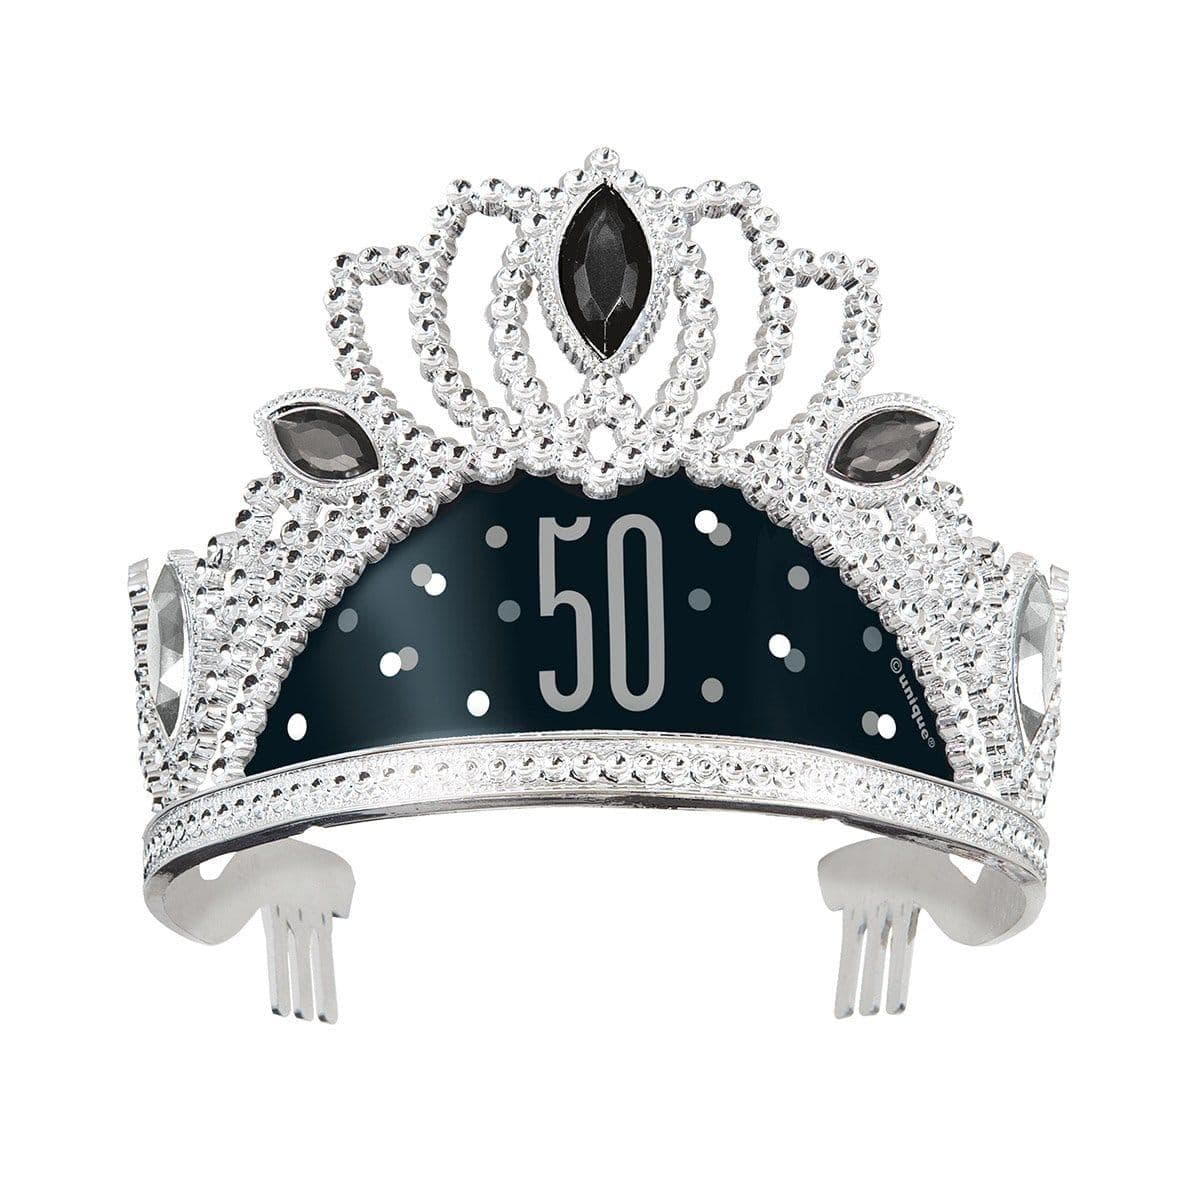 Buy Age Specific Birthday Bonne Fête Black/Silver - Tiara - 50 sold at Party Expert